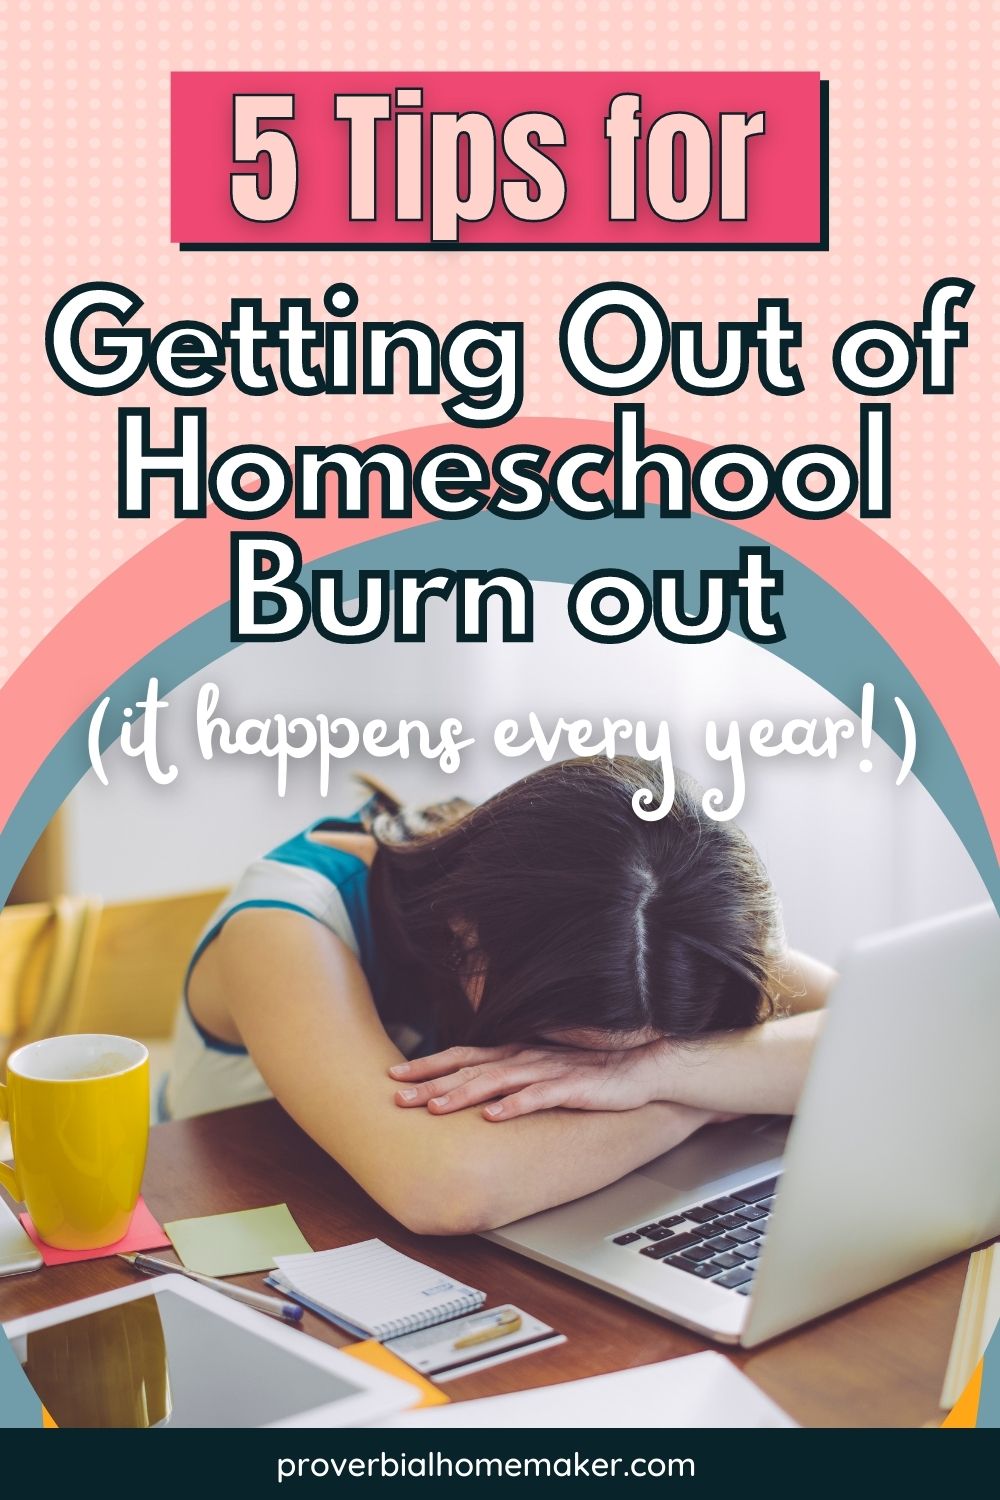 Struggling with homeschool burn out? Feeling blah and like planning next year is more fun than homeschooling this one? These tips are for you!